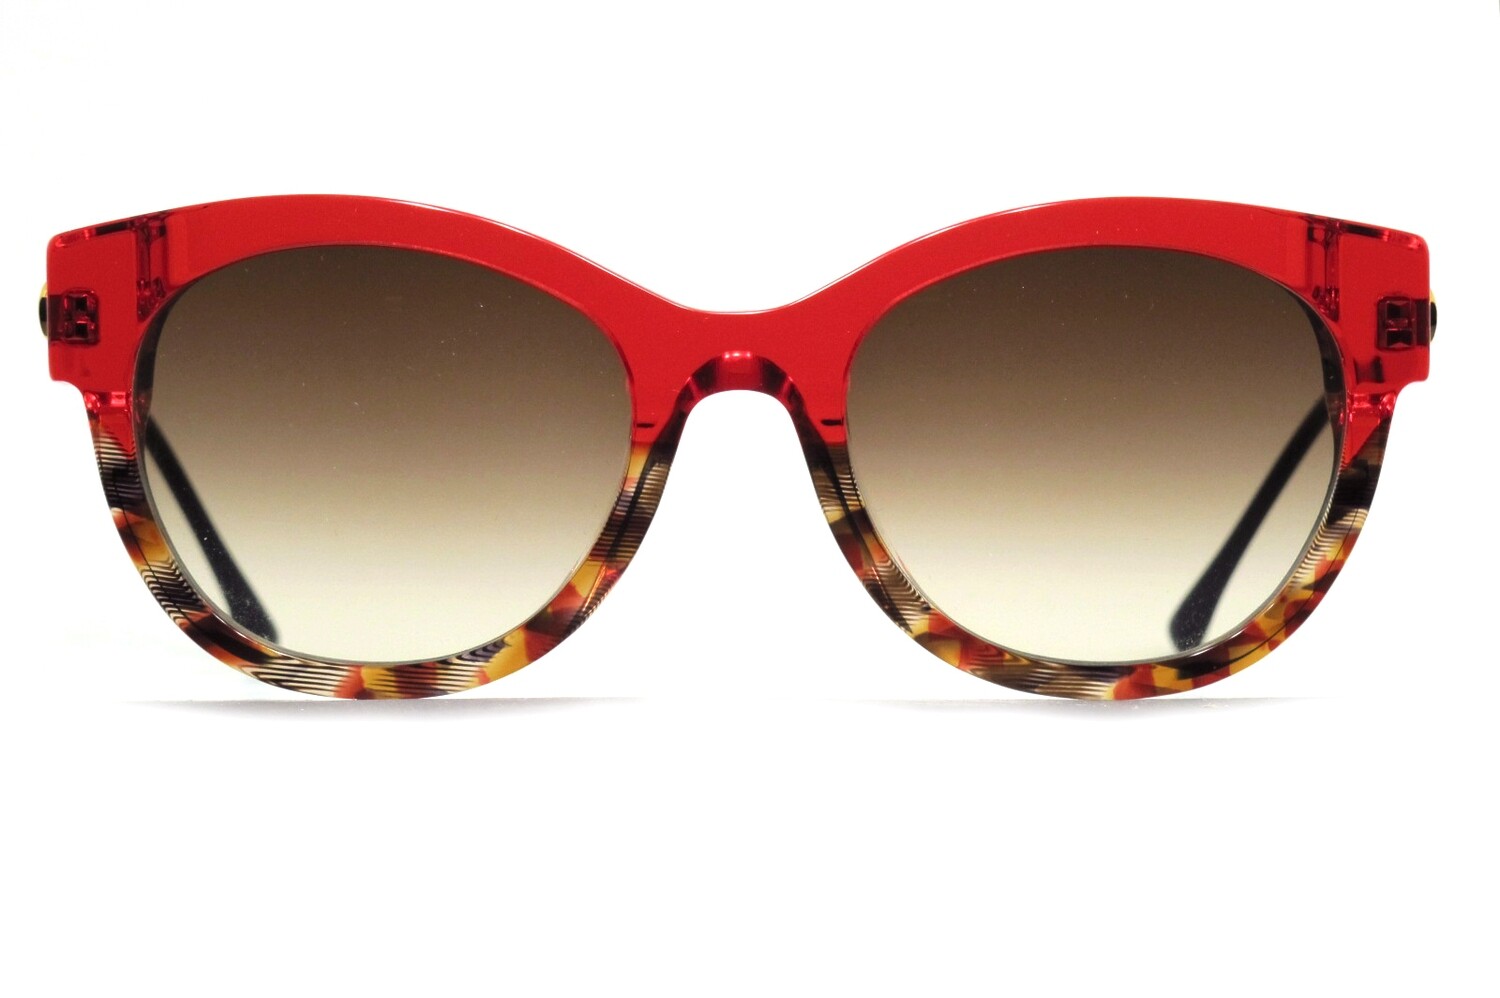 Peachy by Thierry Lasry